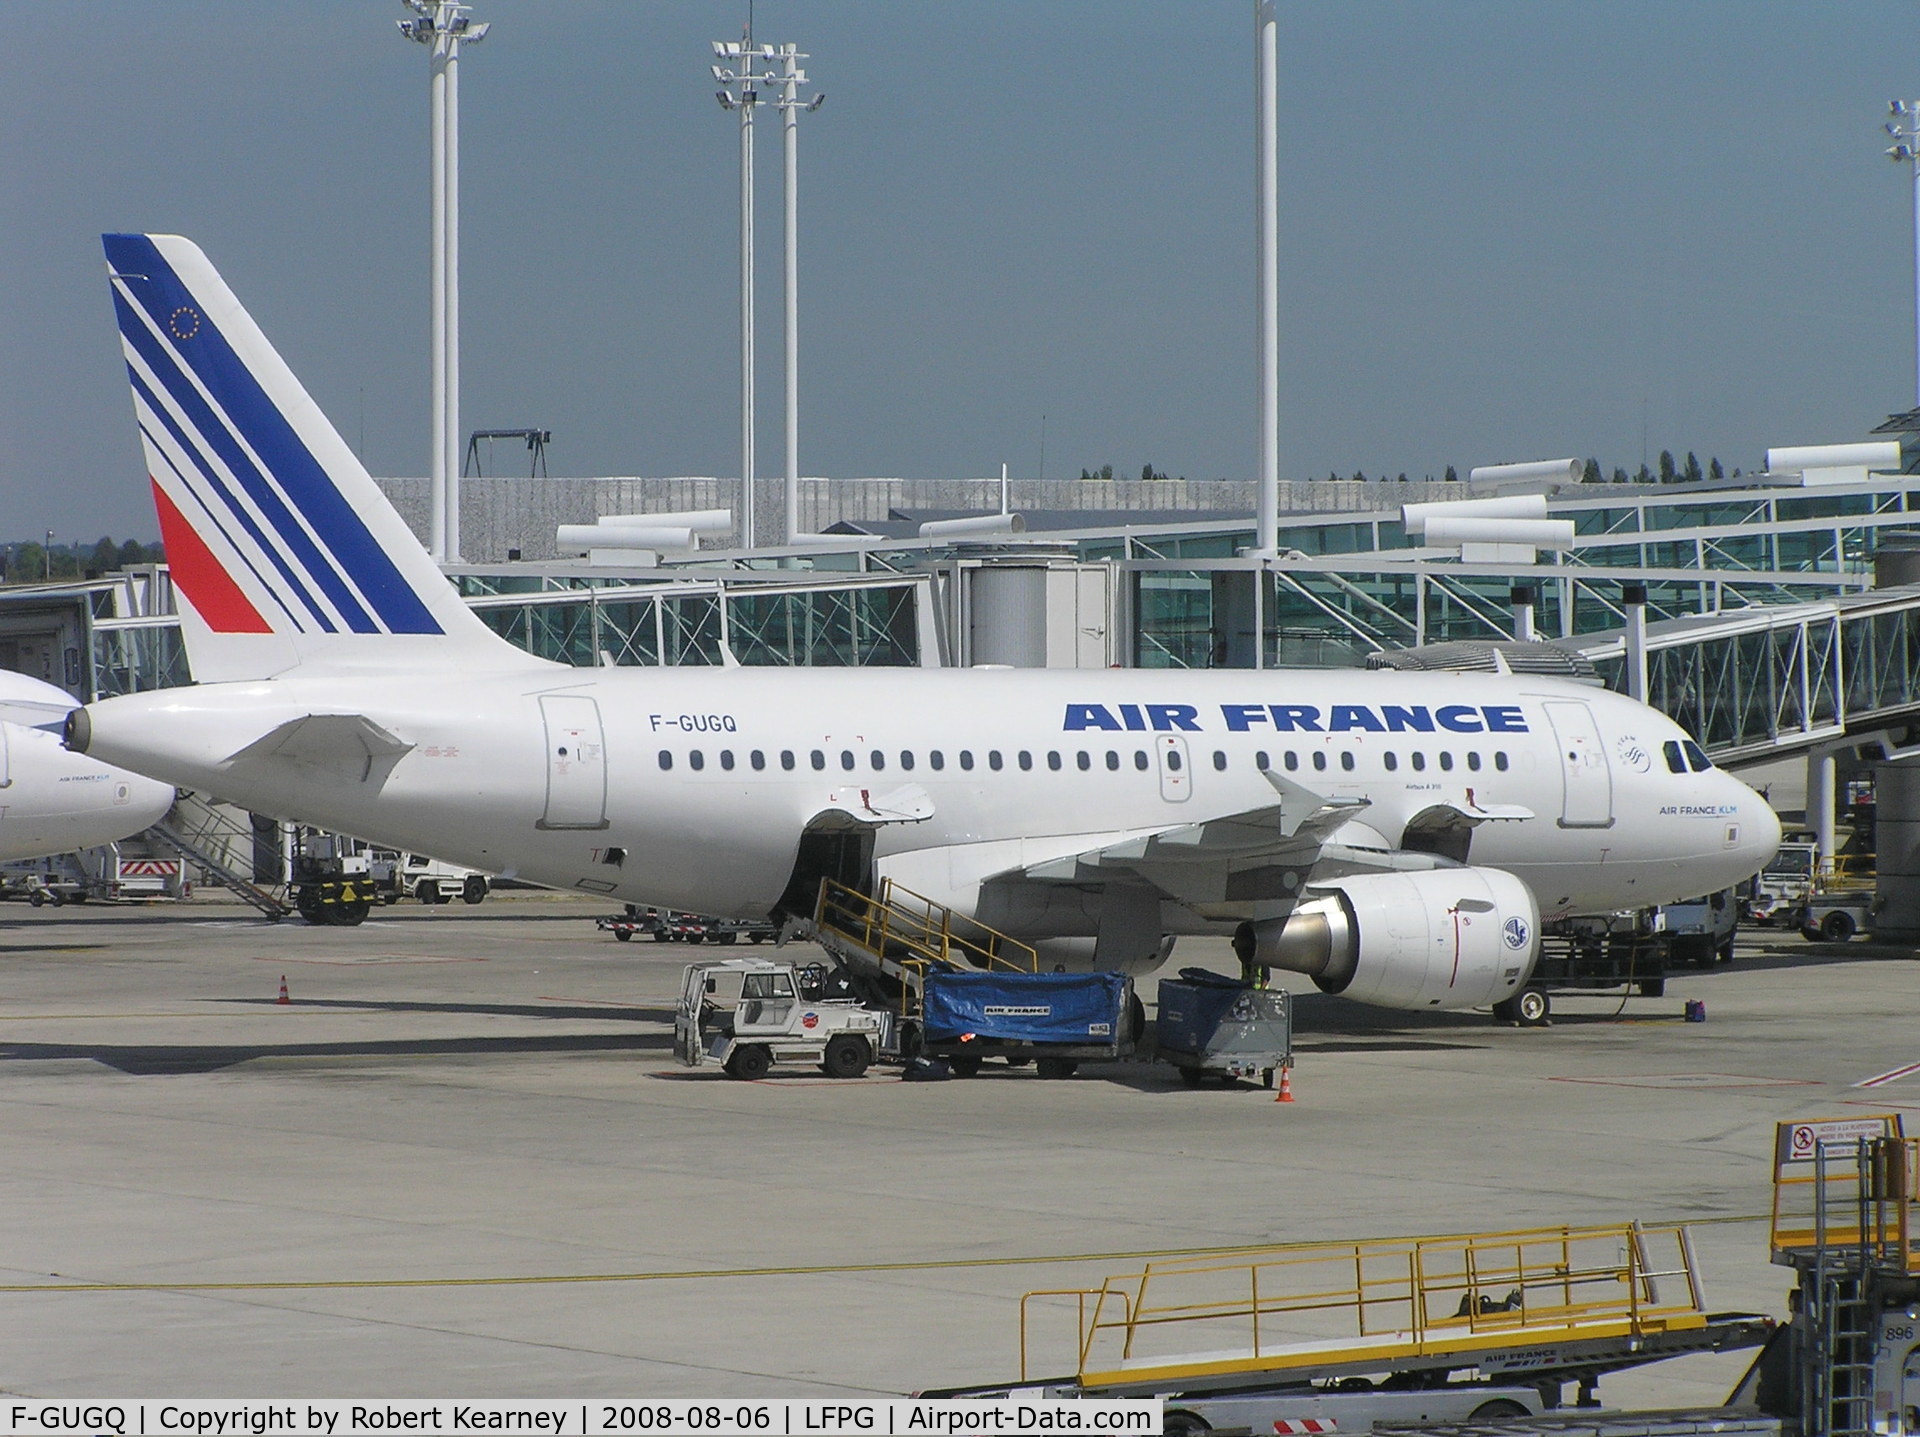 F-GUGQ, 2006 Airbus A318-111 C/N 2972, Air France on stand